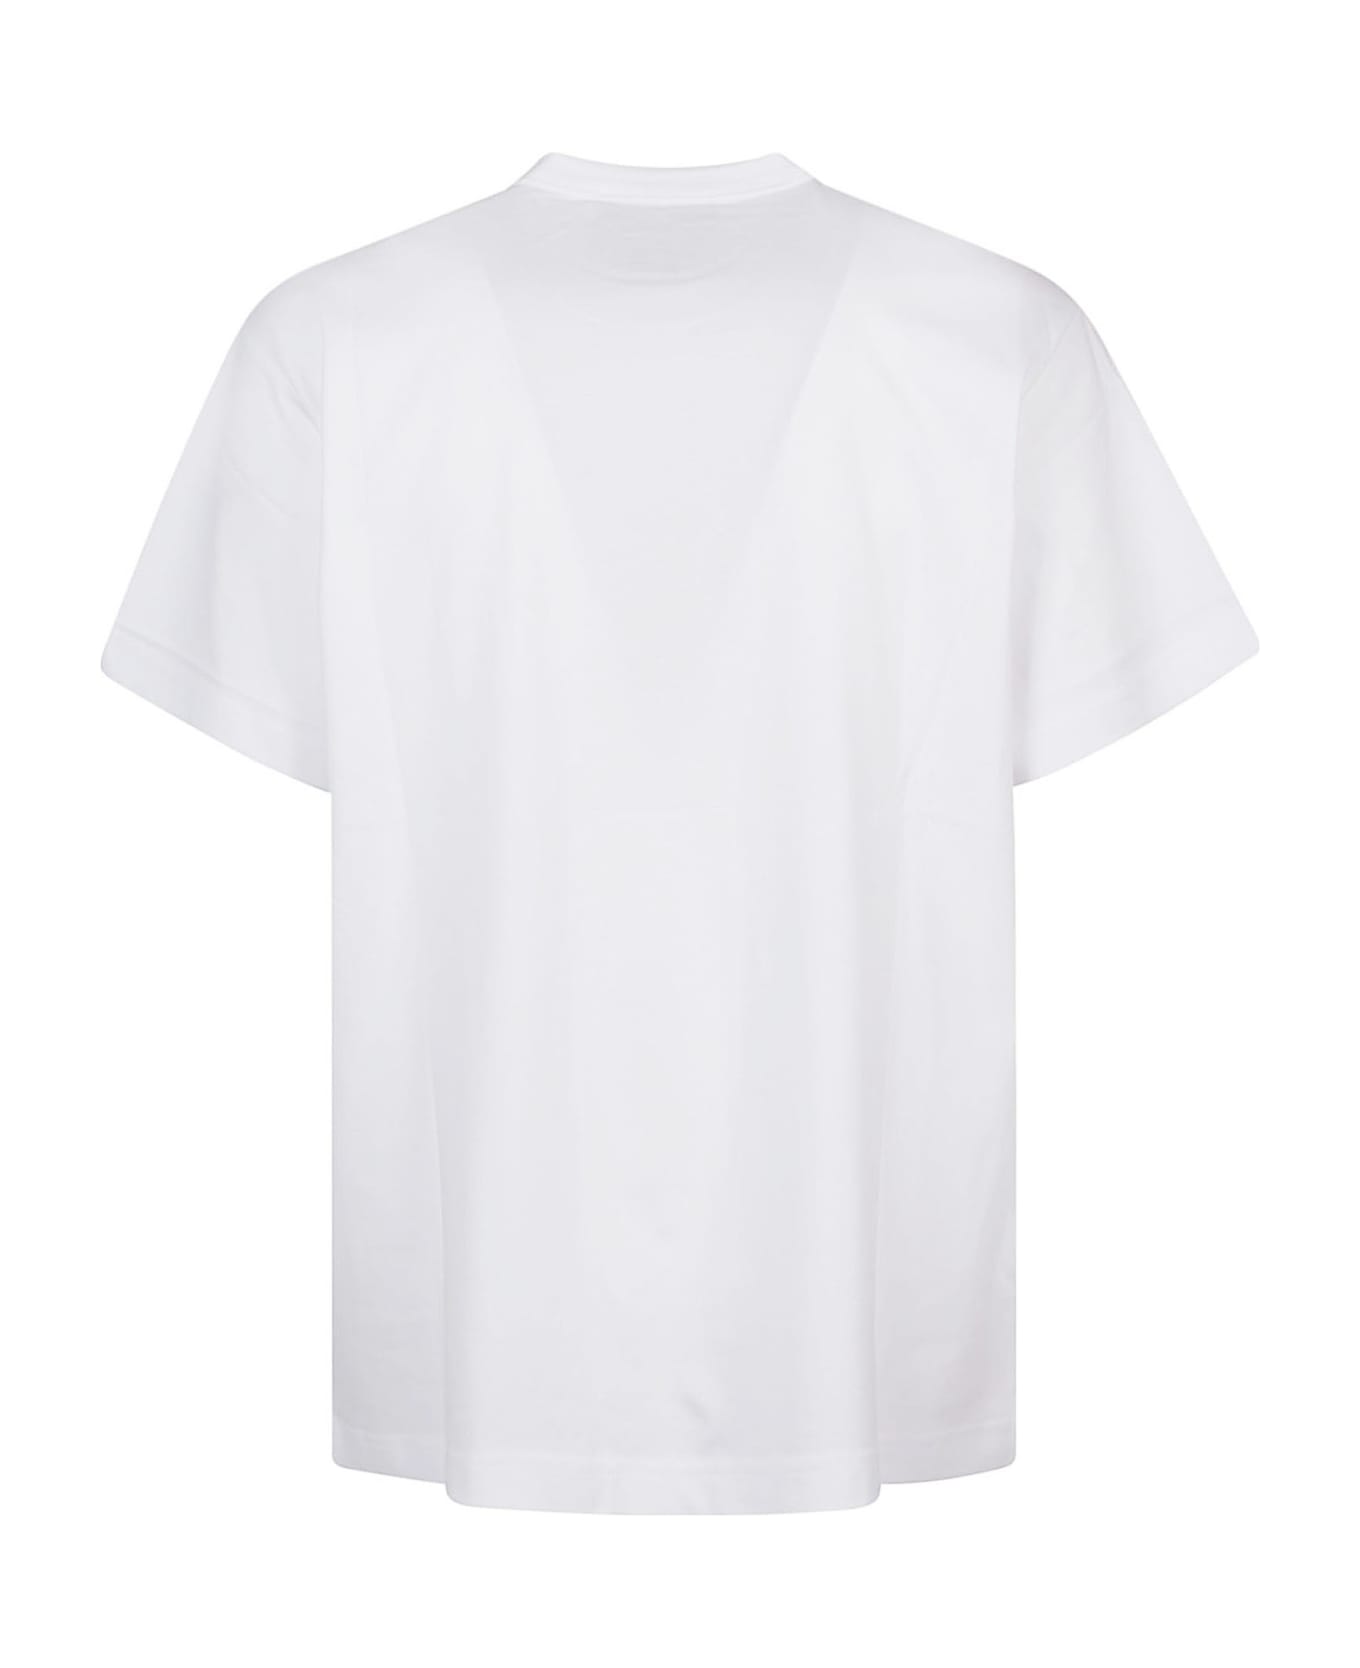 Versace Jeans Couture Magazine Logo T-shirt - White